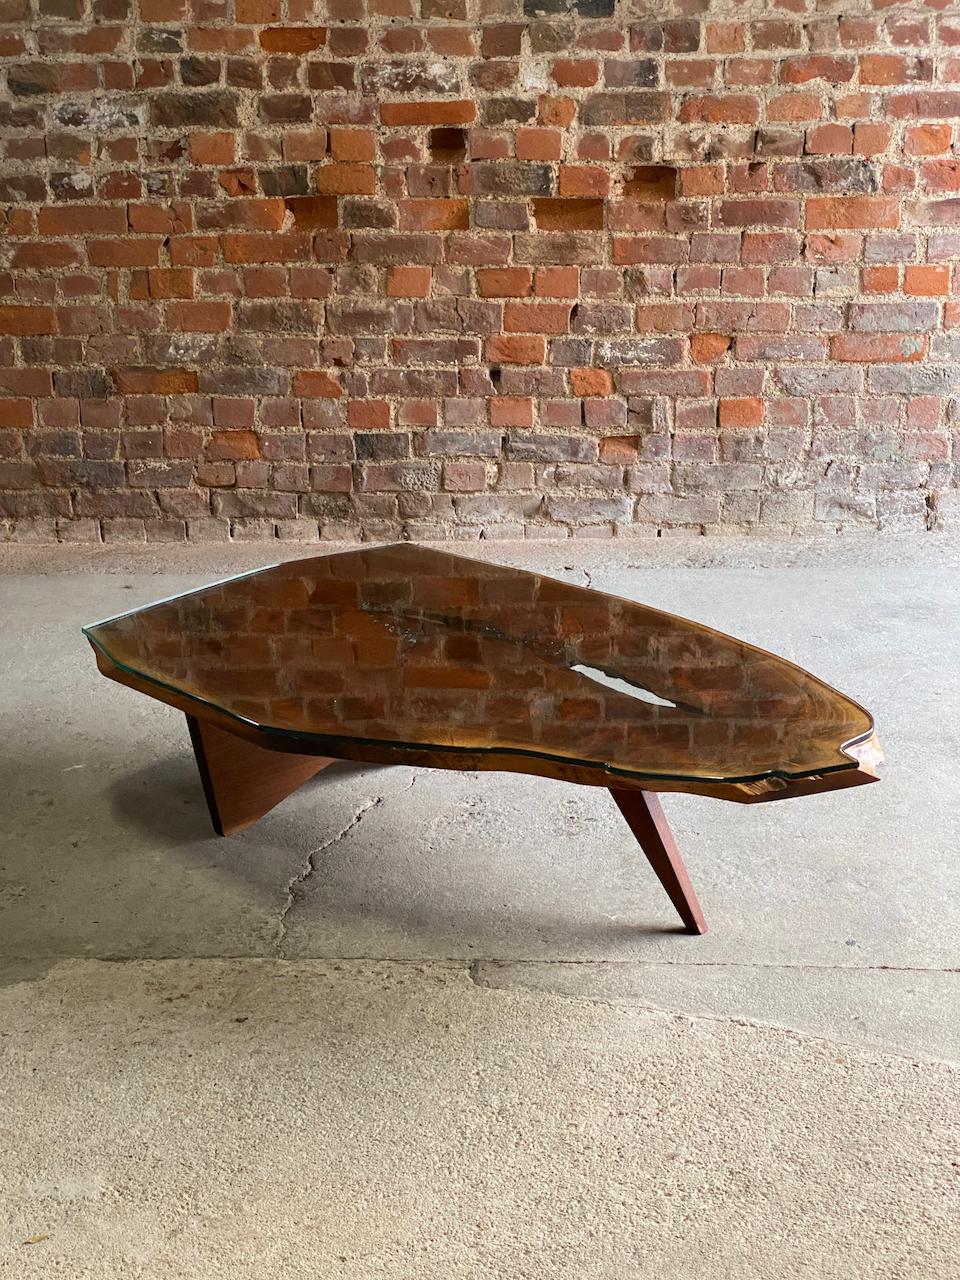 George Nakashima ‘Slab’ Live Edge Coffee Table 1961 In Good Condition For Sale In Longdon, Tewkesbury